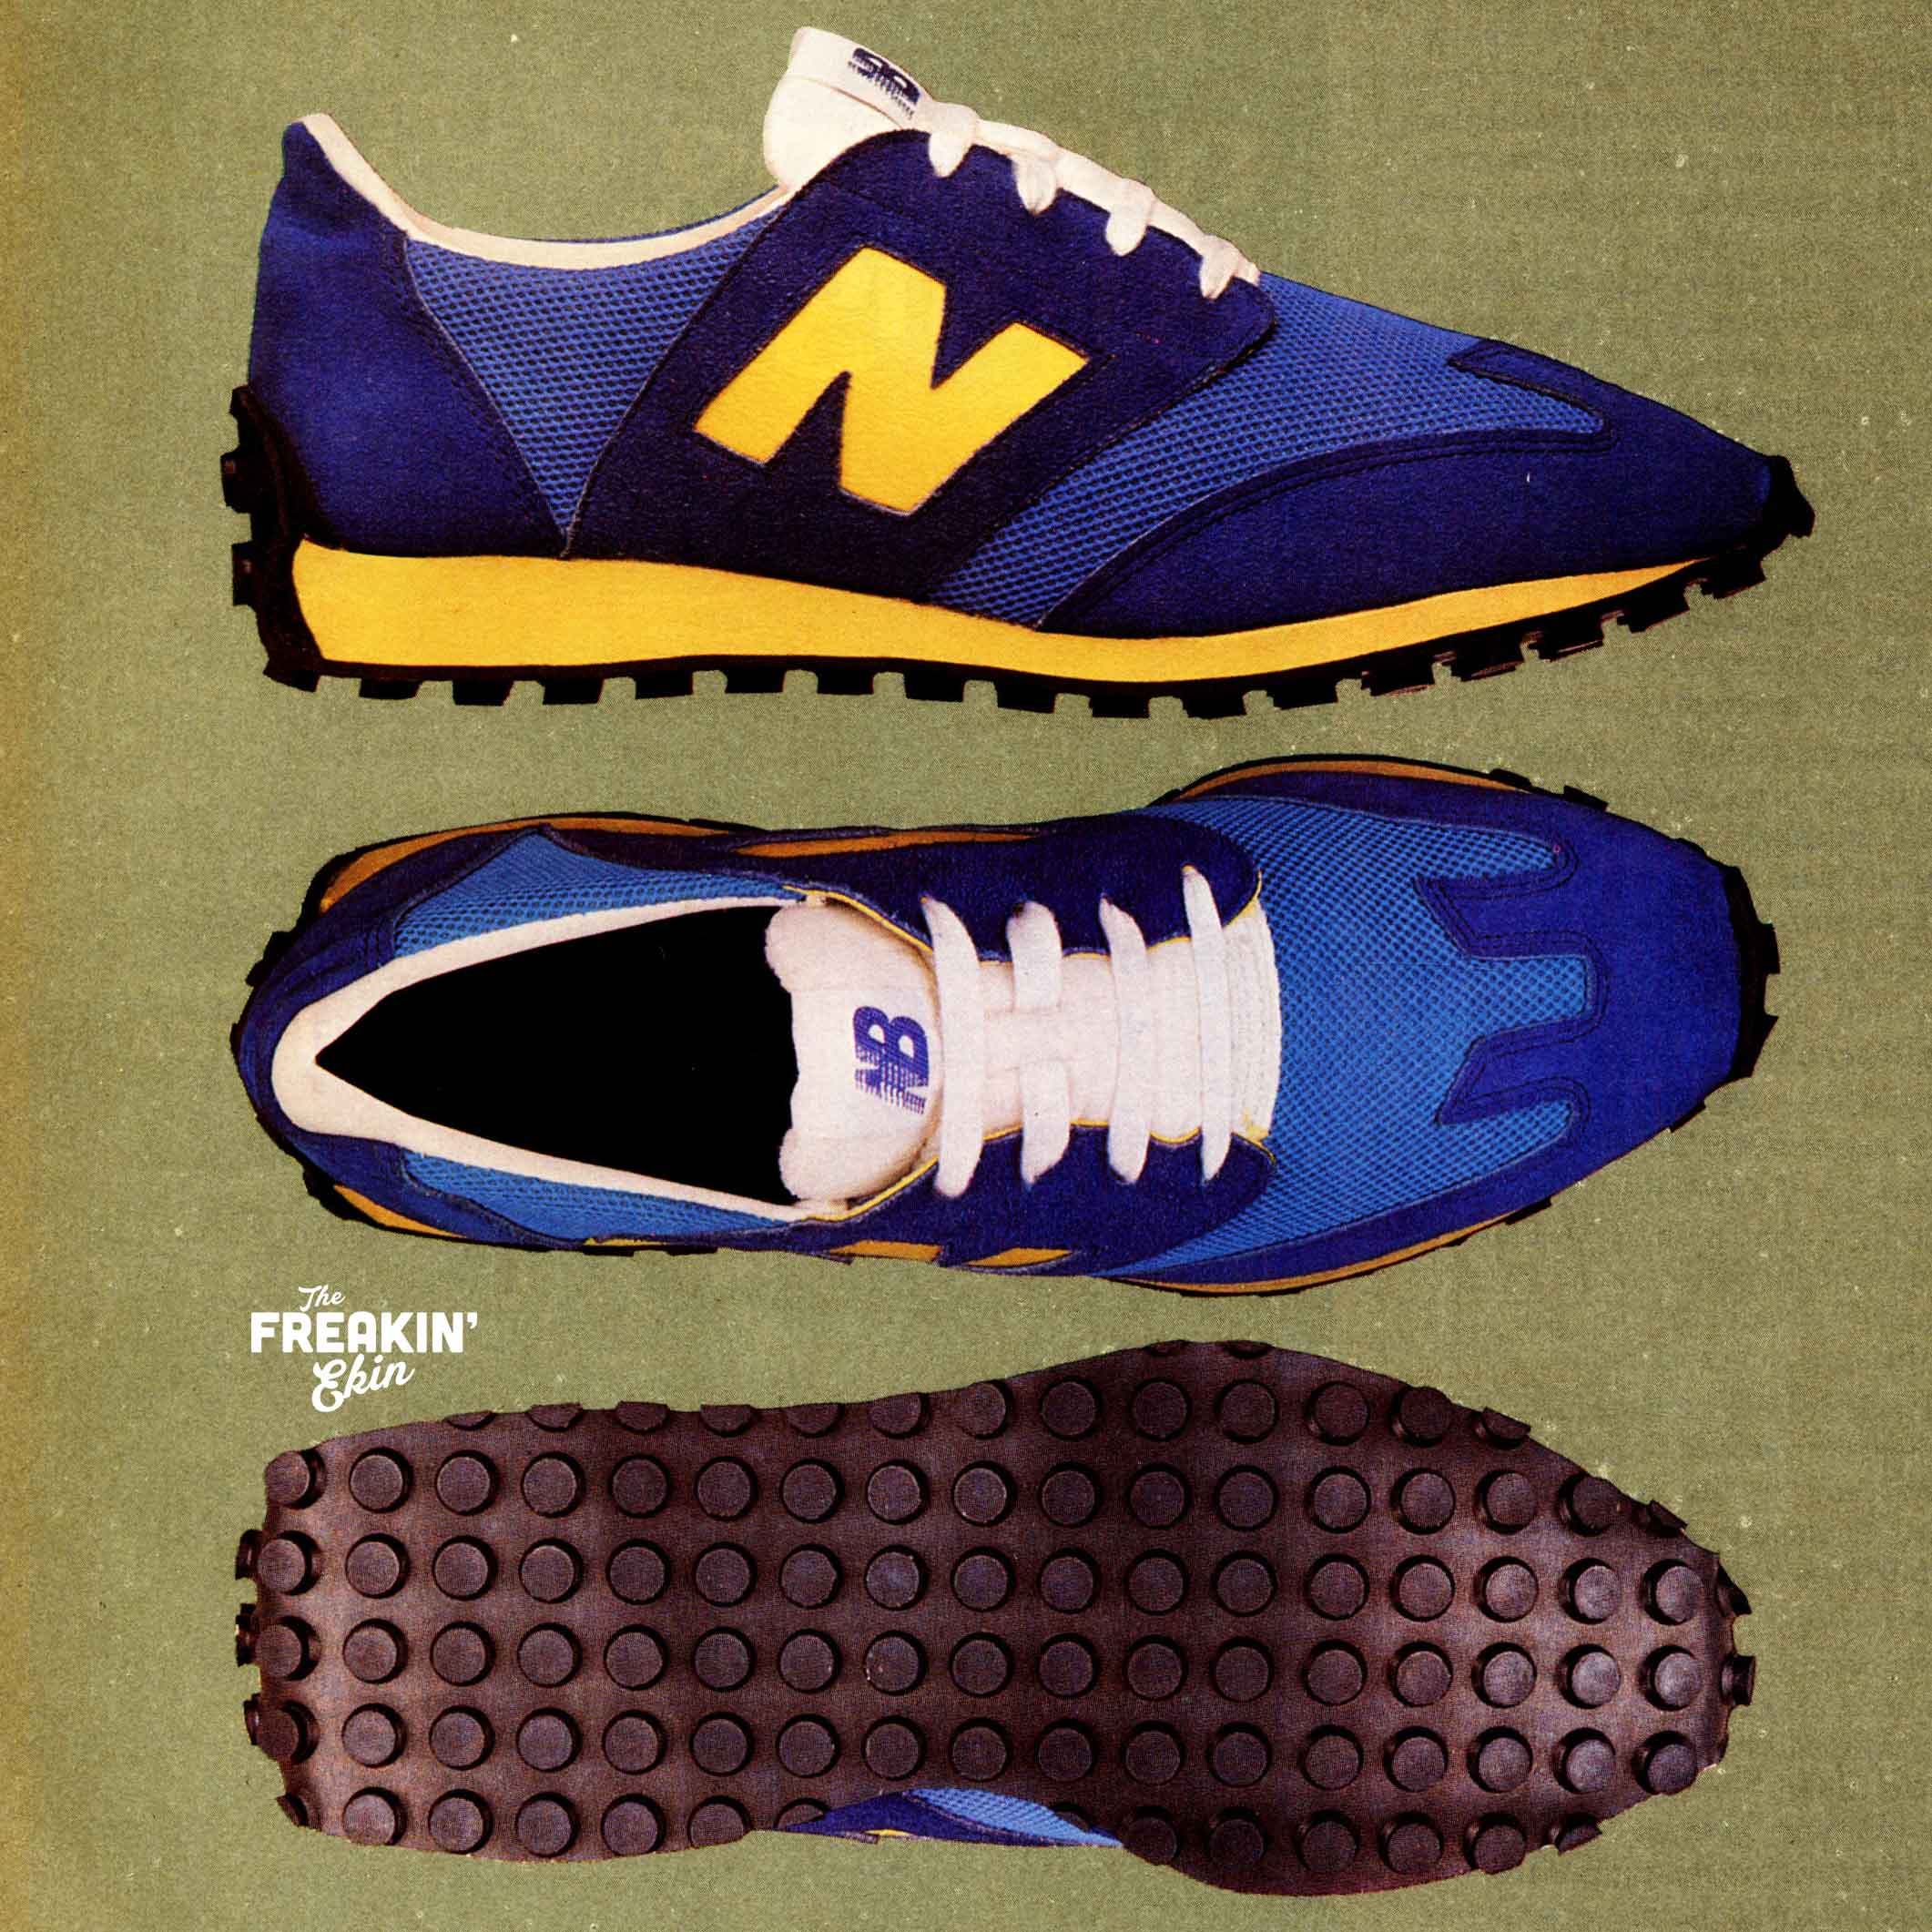 The Deffest®. A vintage and retro sneaker blog. — New Balance ...